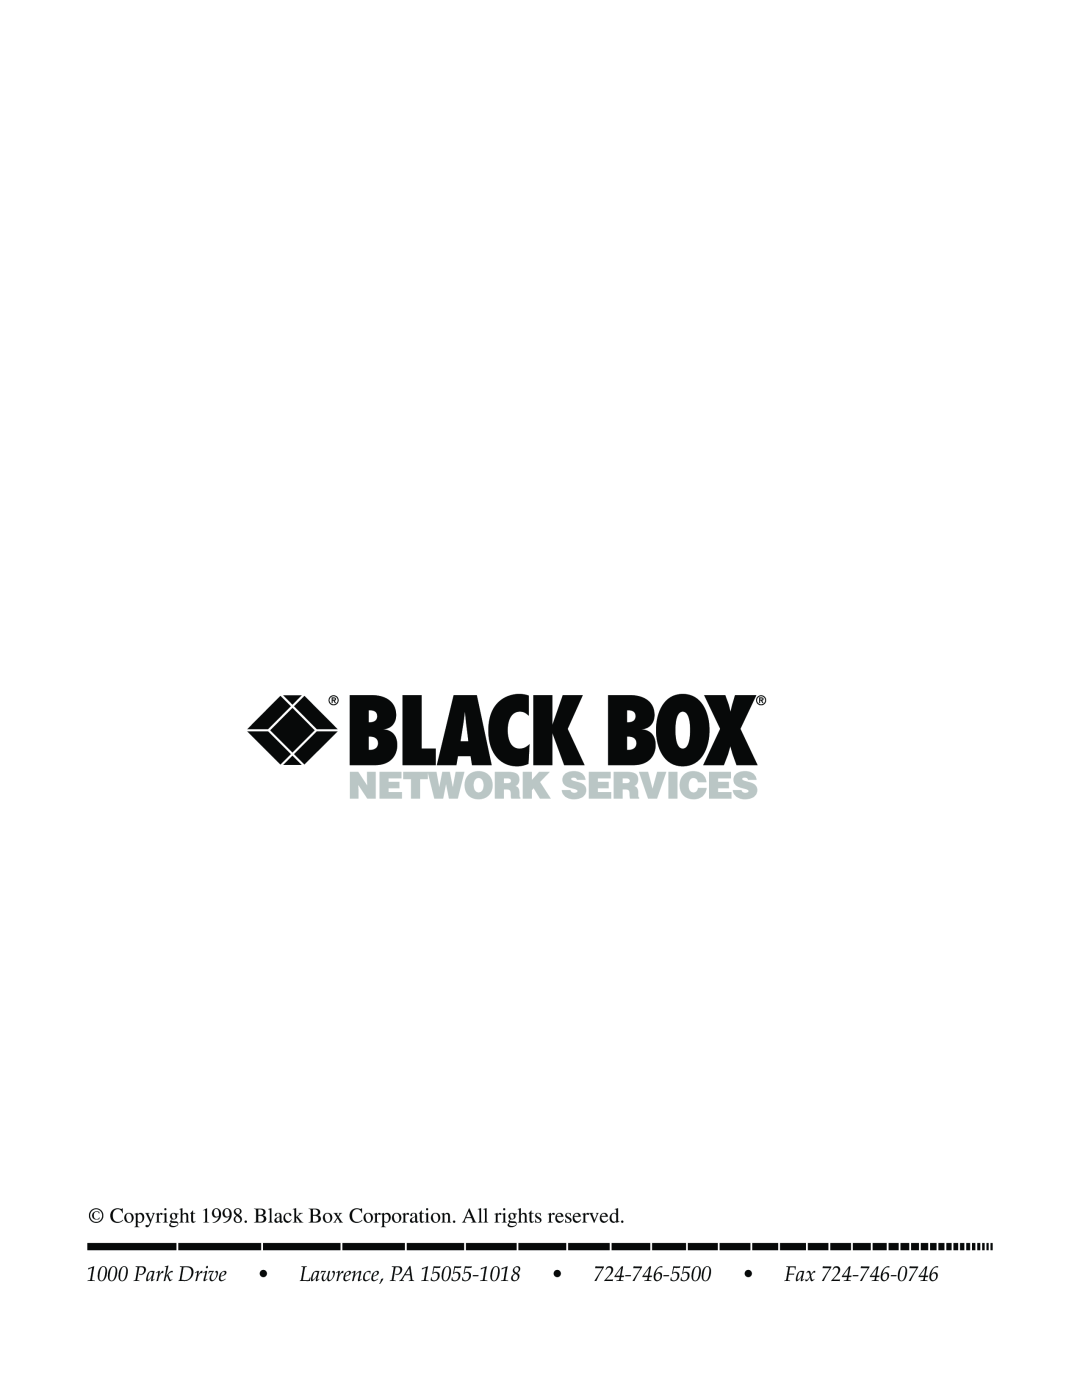 Black Box LW004A, LW012AE, LW011AE, LW008A, LW005A, LW009A manual Copyright 1998. Black Box Corporation. All rights reserved 